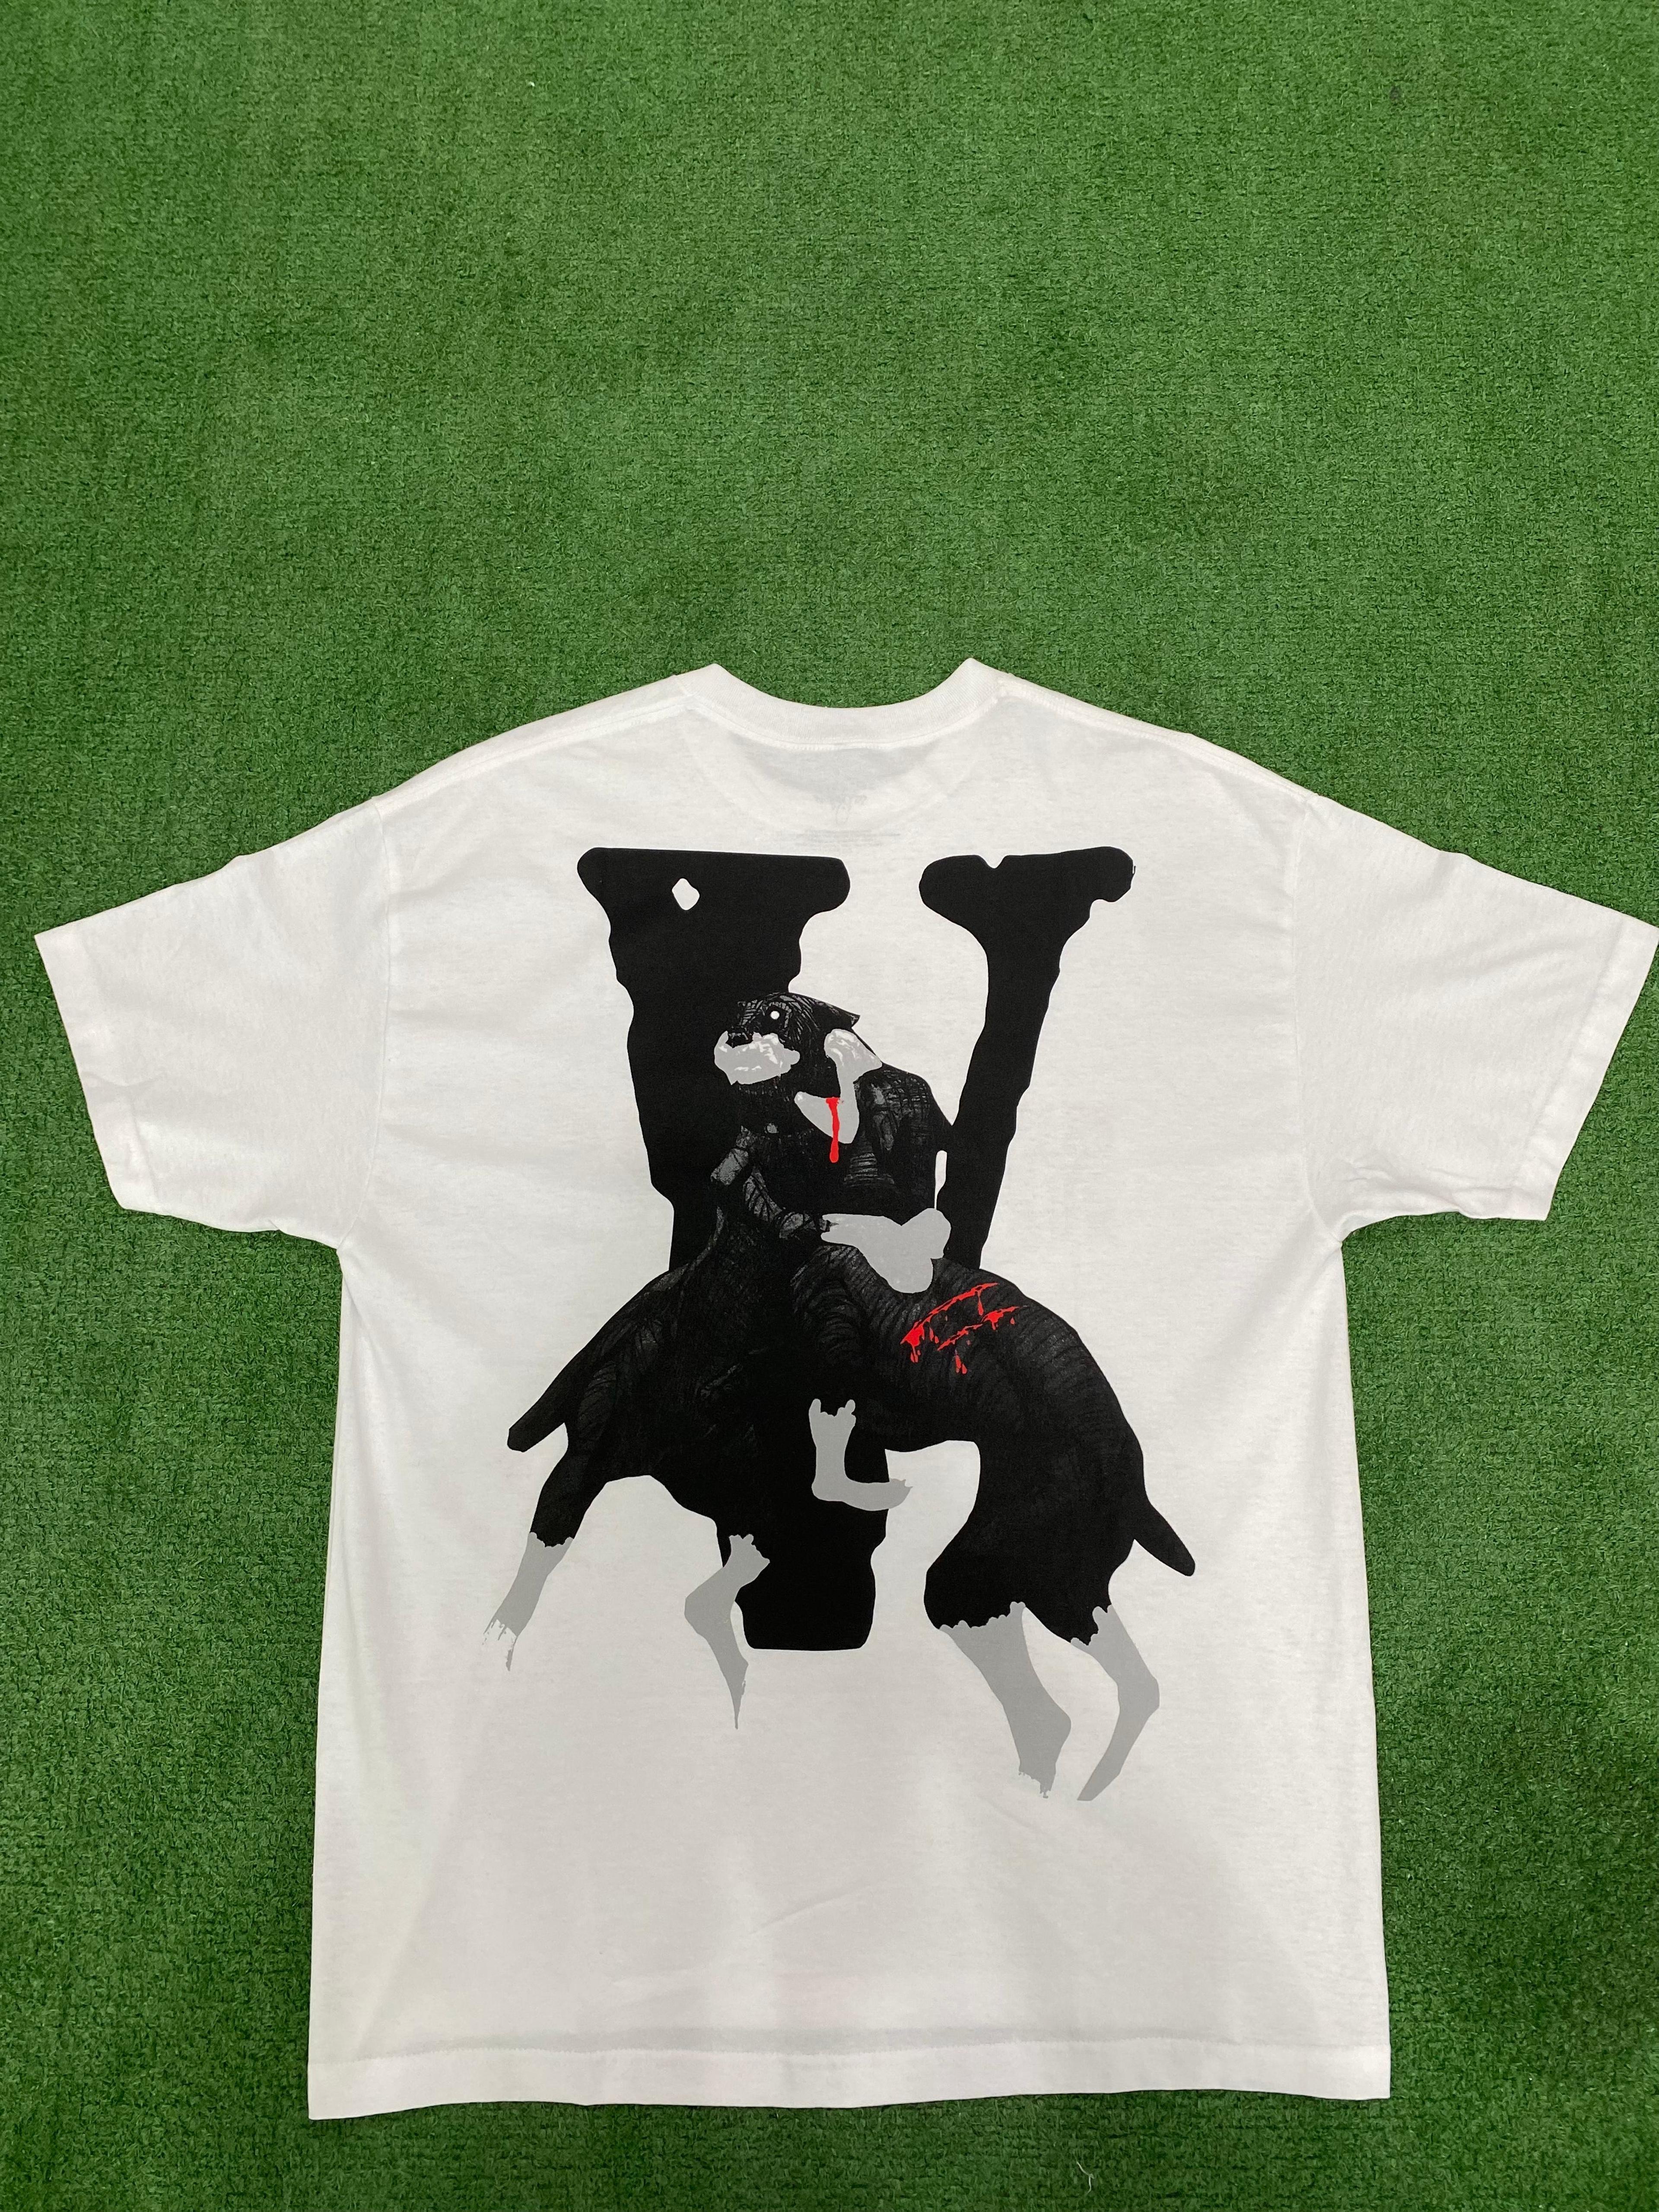 Alternate View 4 of Vlone x City Morgue Dogs Tee White